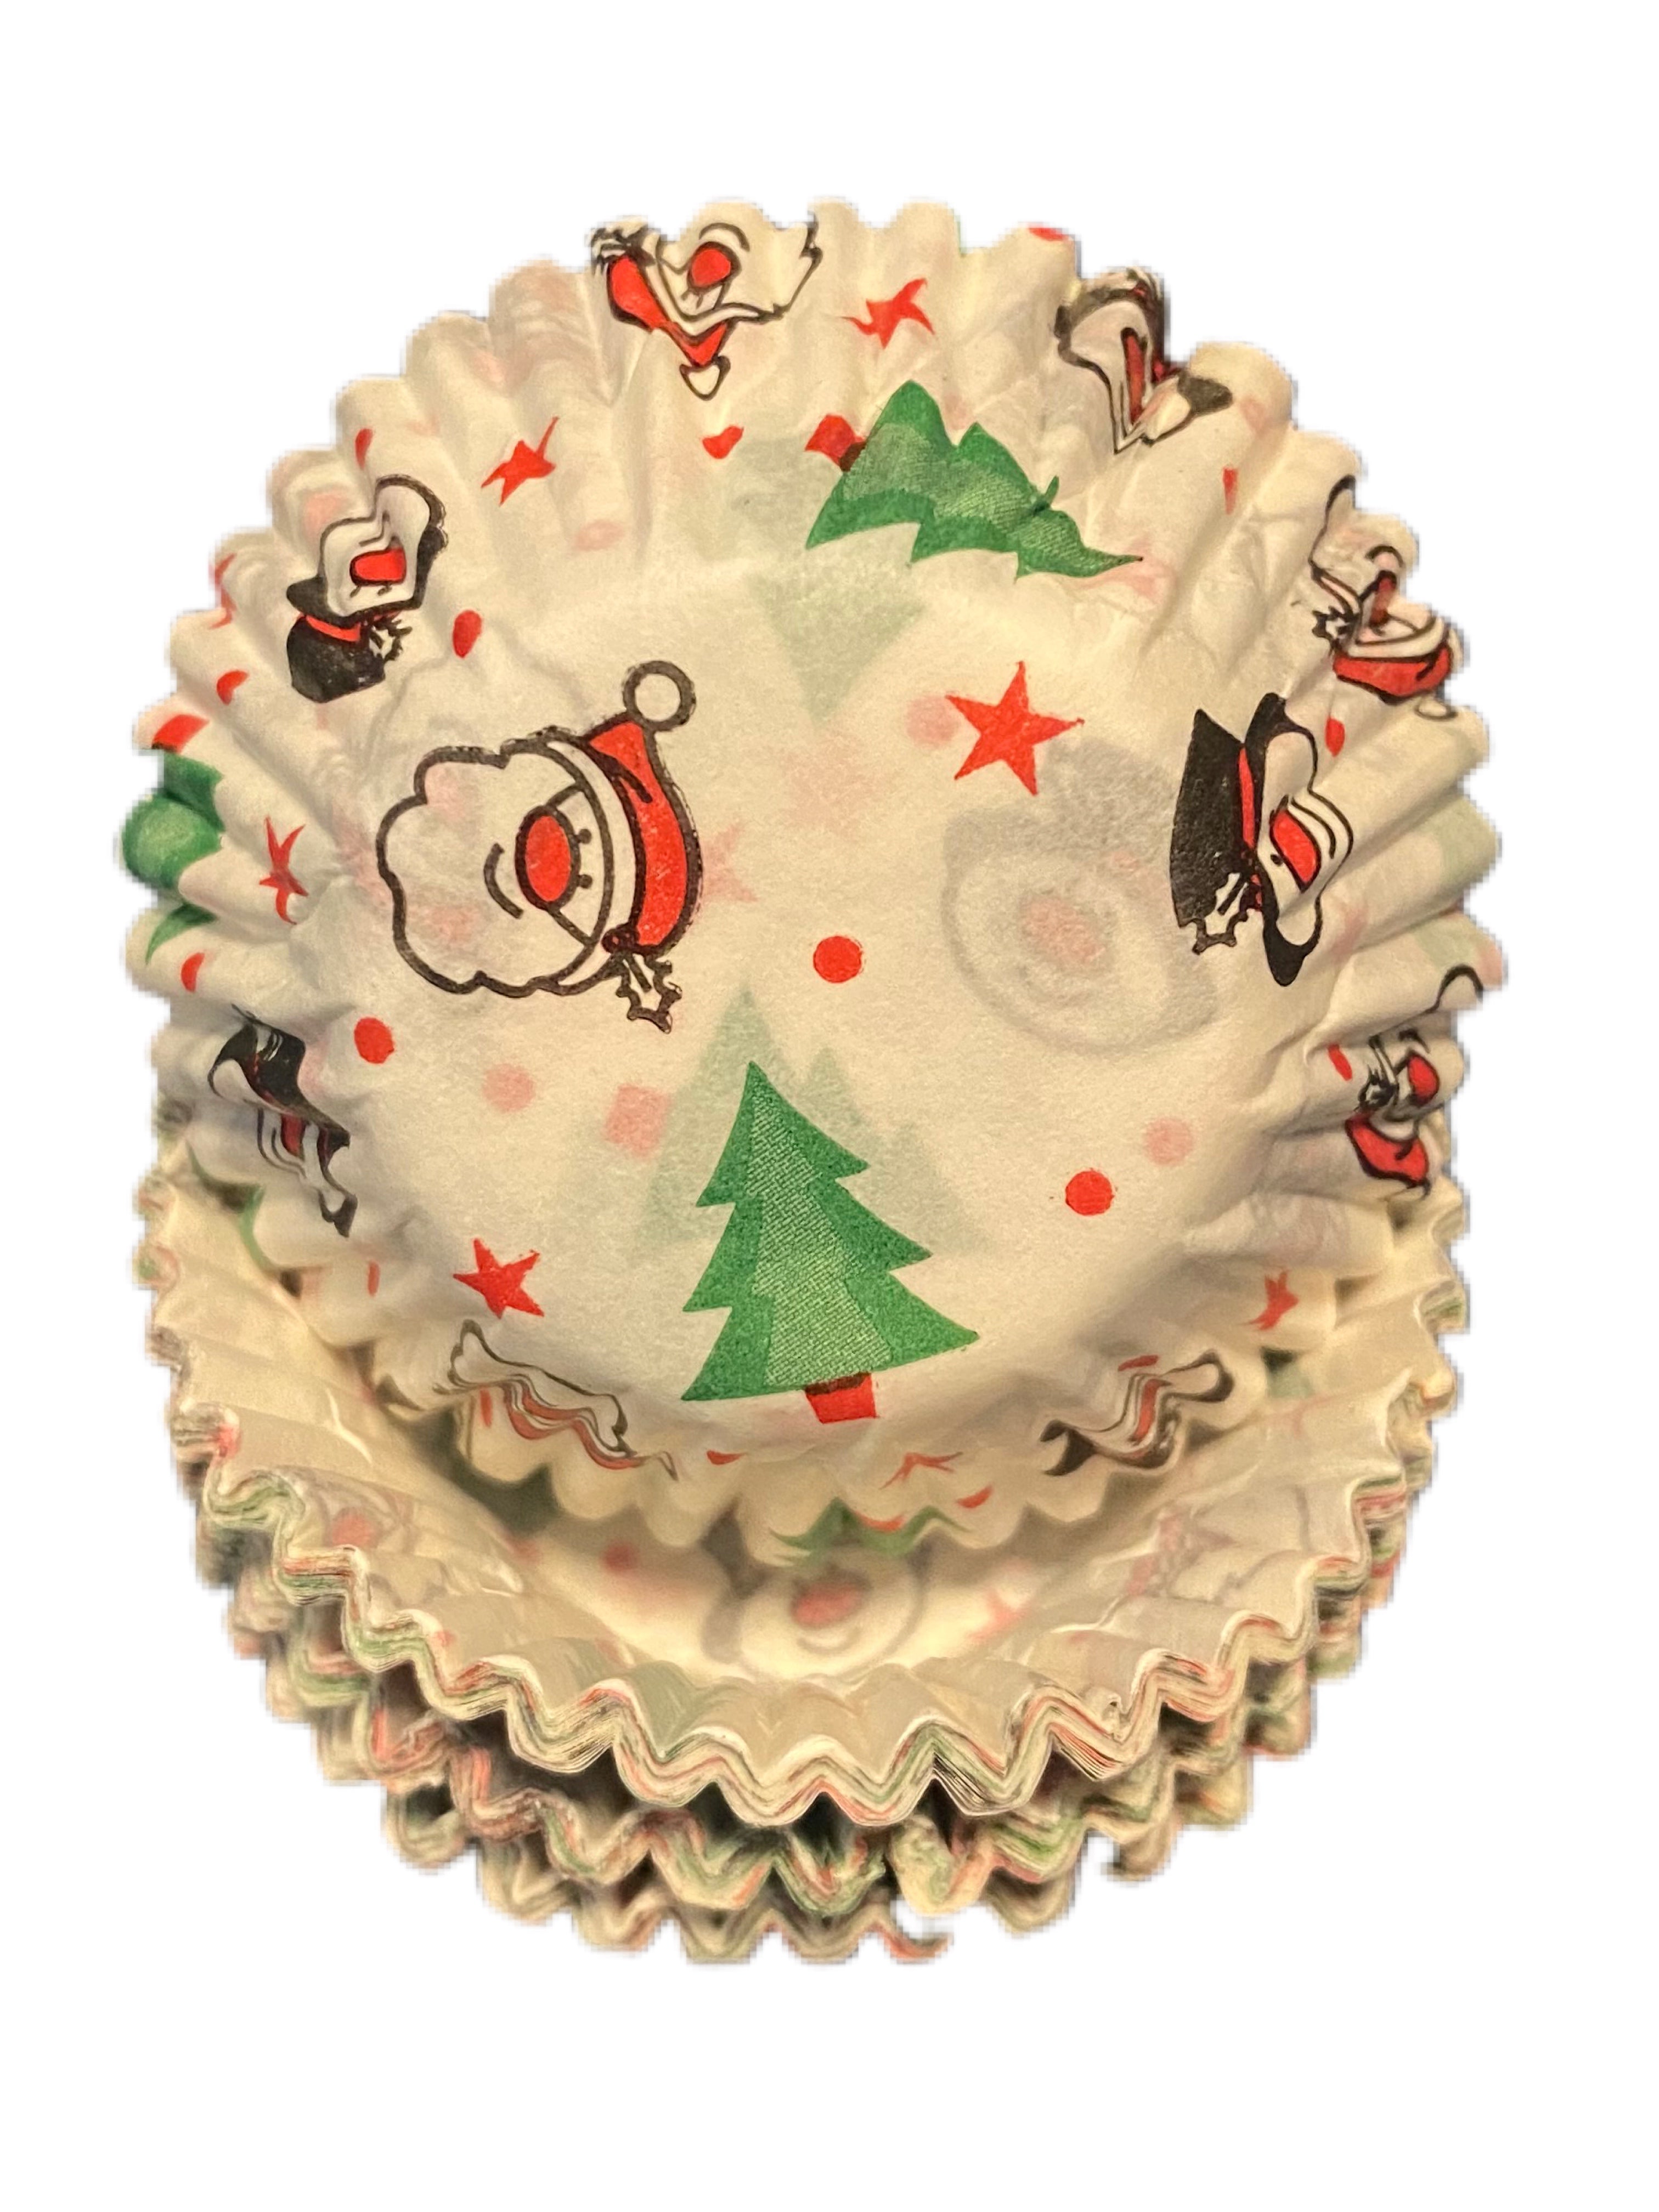 Petit Four Mini Baking Cases - Santa and Christmas Trees - Pack of 100 - Ideal for Mini Cupcakes, chocolates, sweets or Petit Fours - Kate's Cupboard